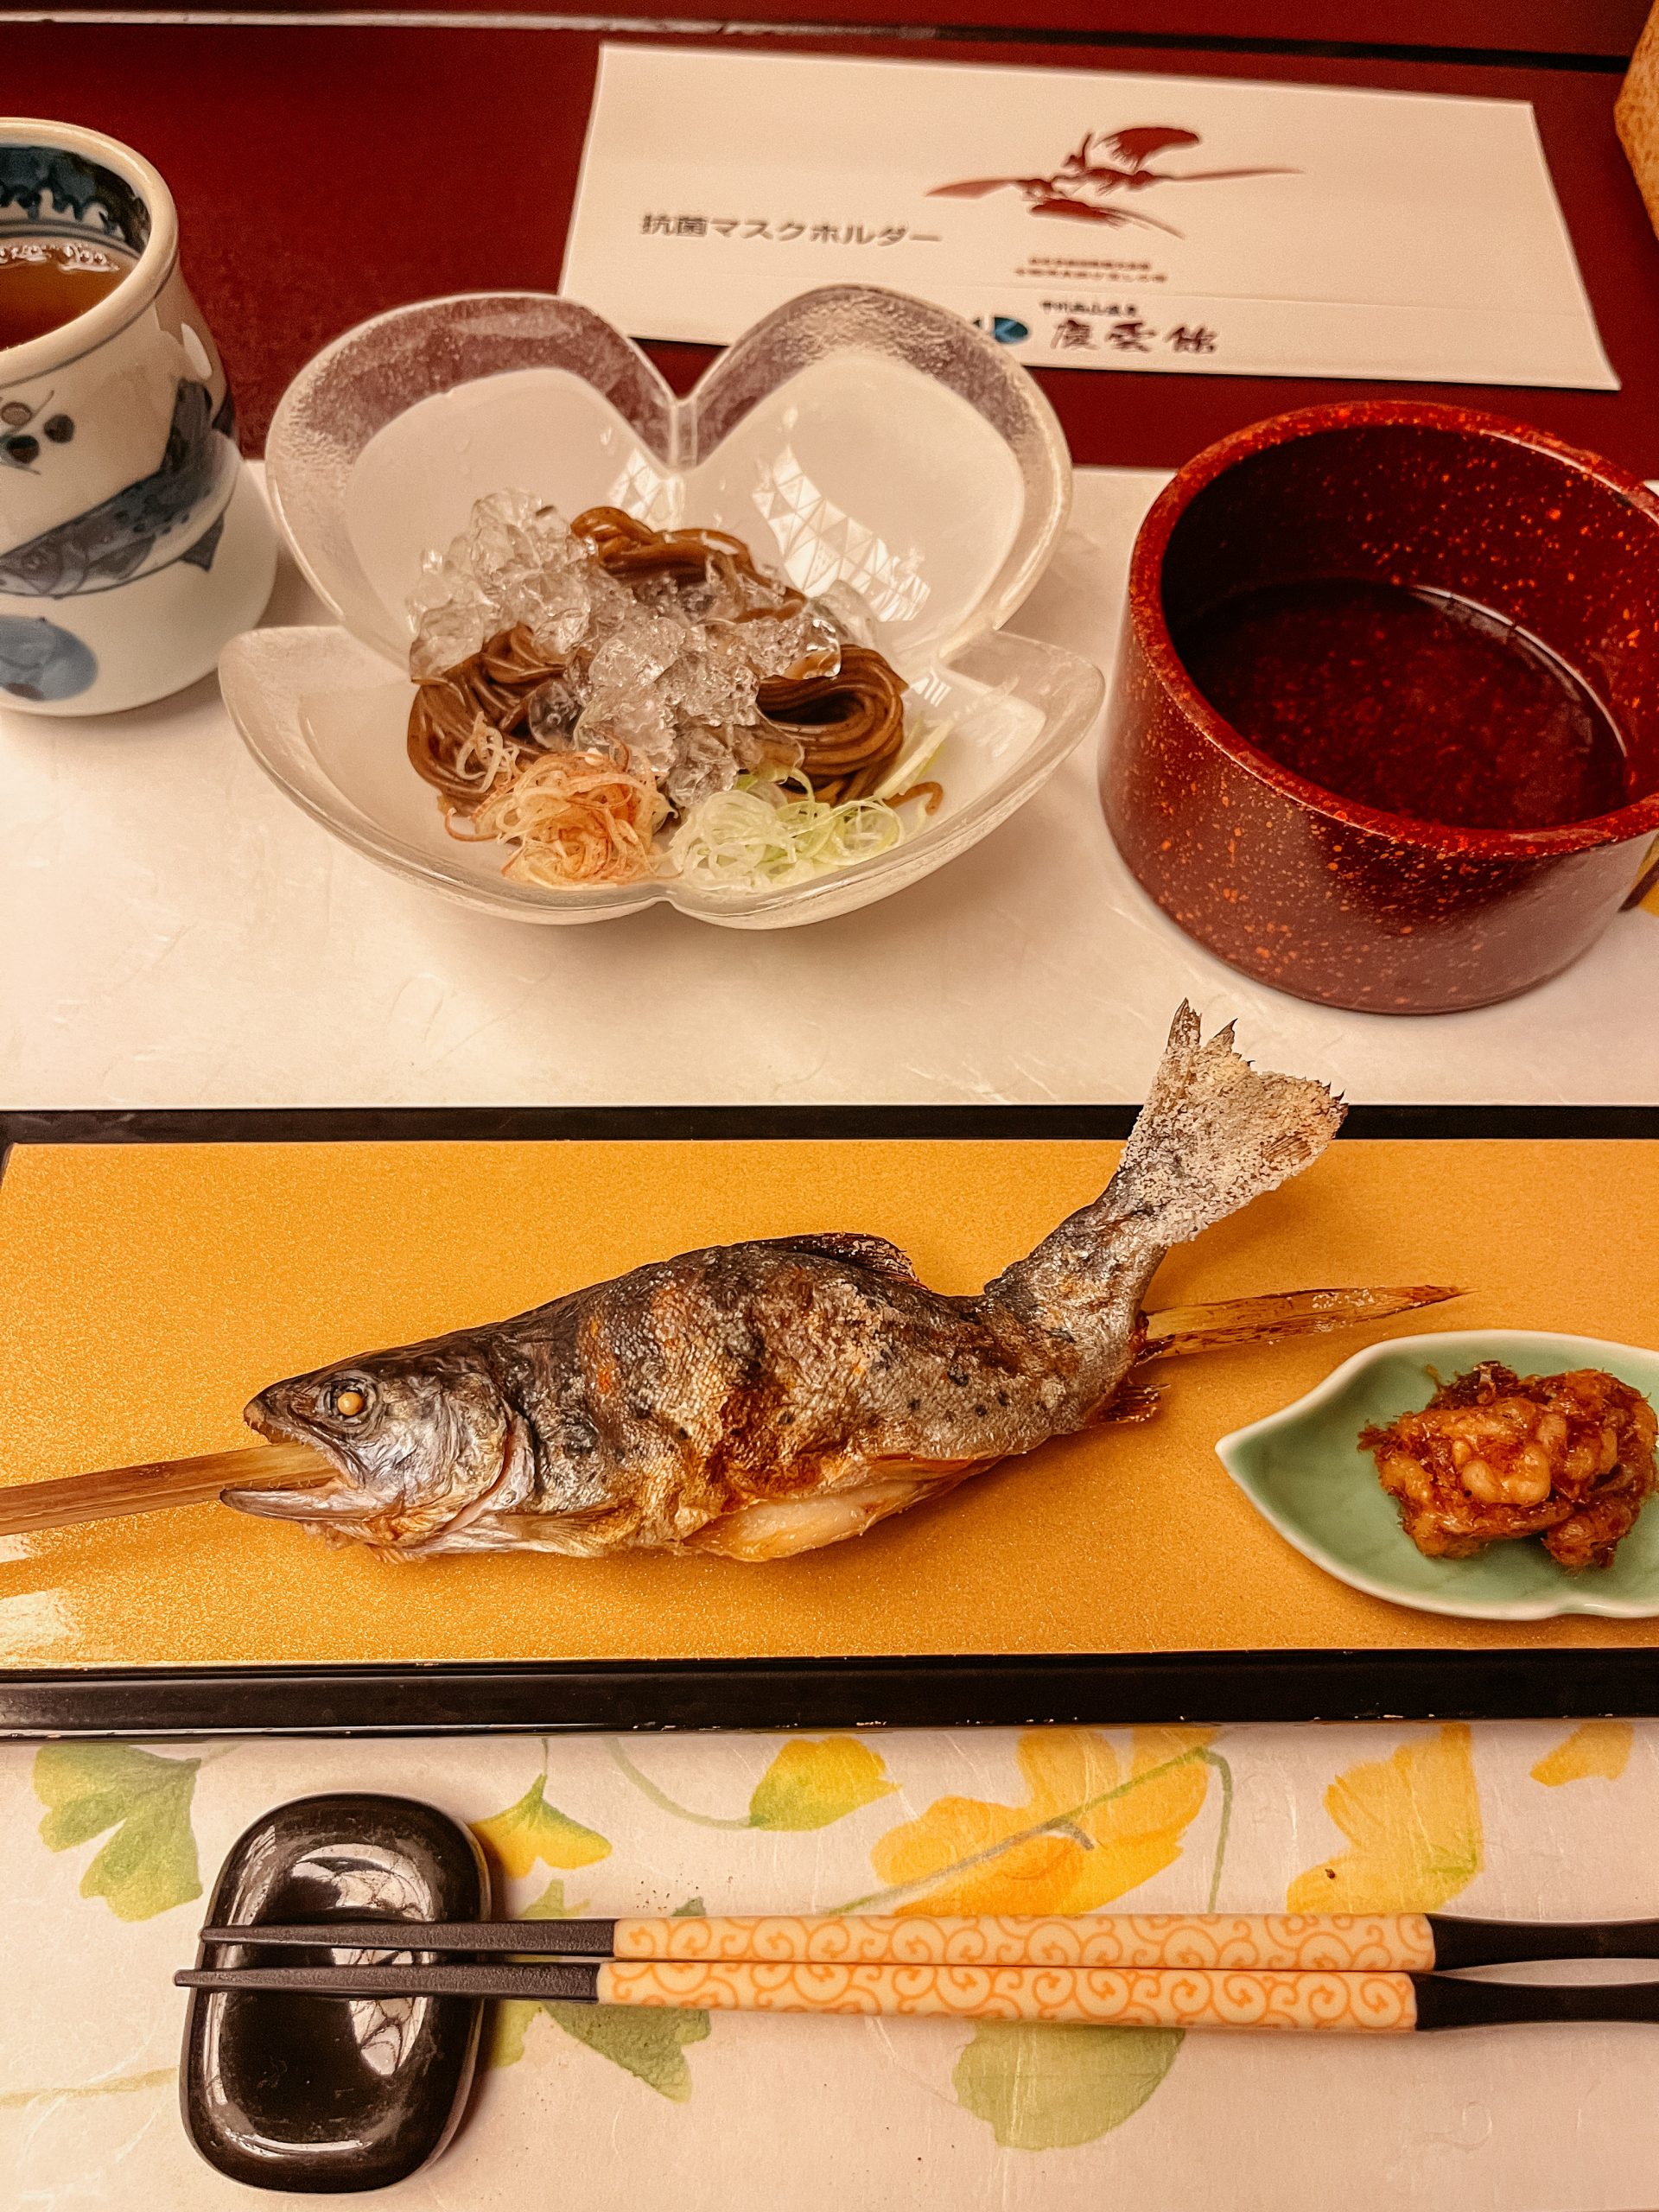 Fish served on a plate with cold soba